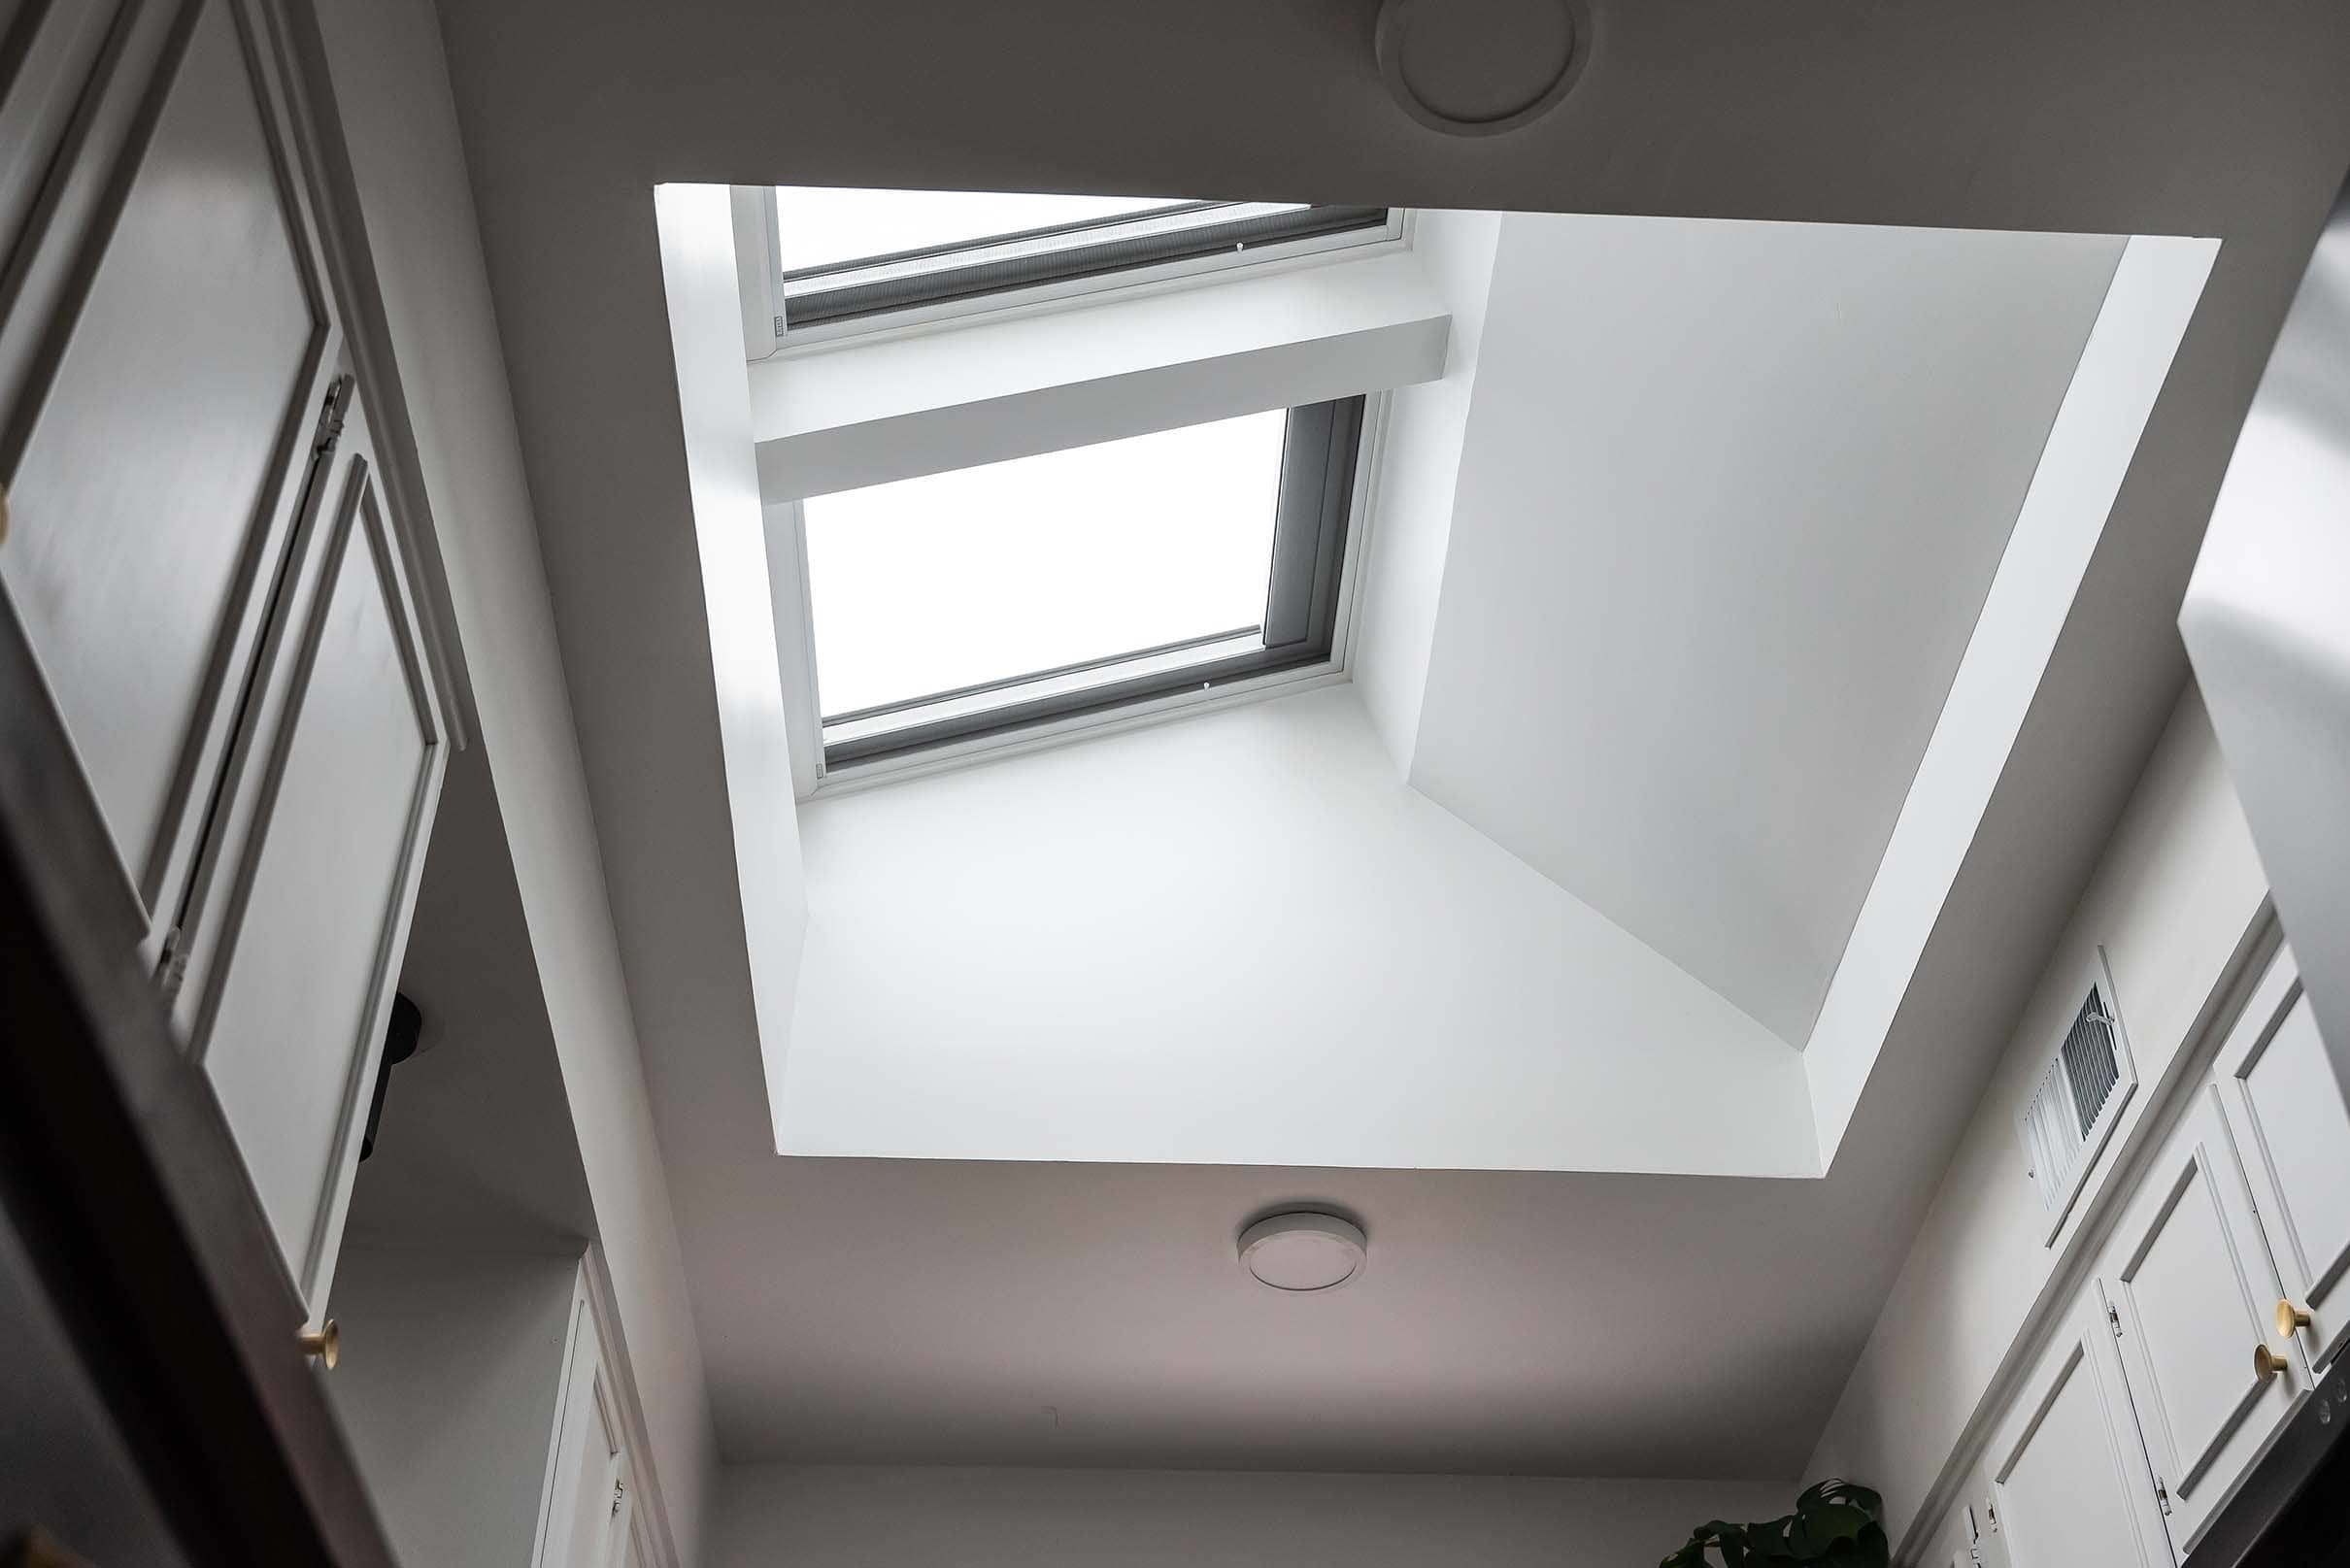 Two skylights installed side by side with large lightwell